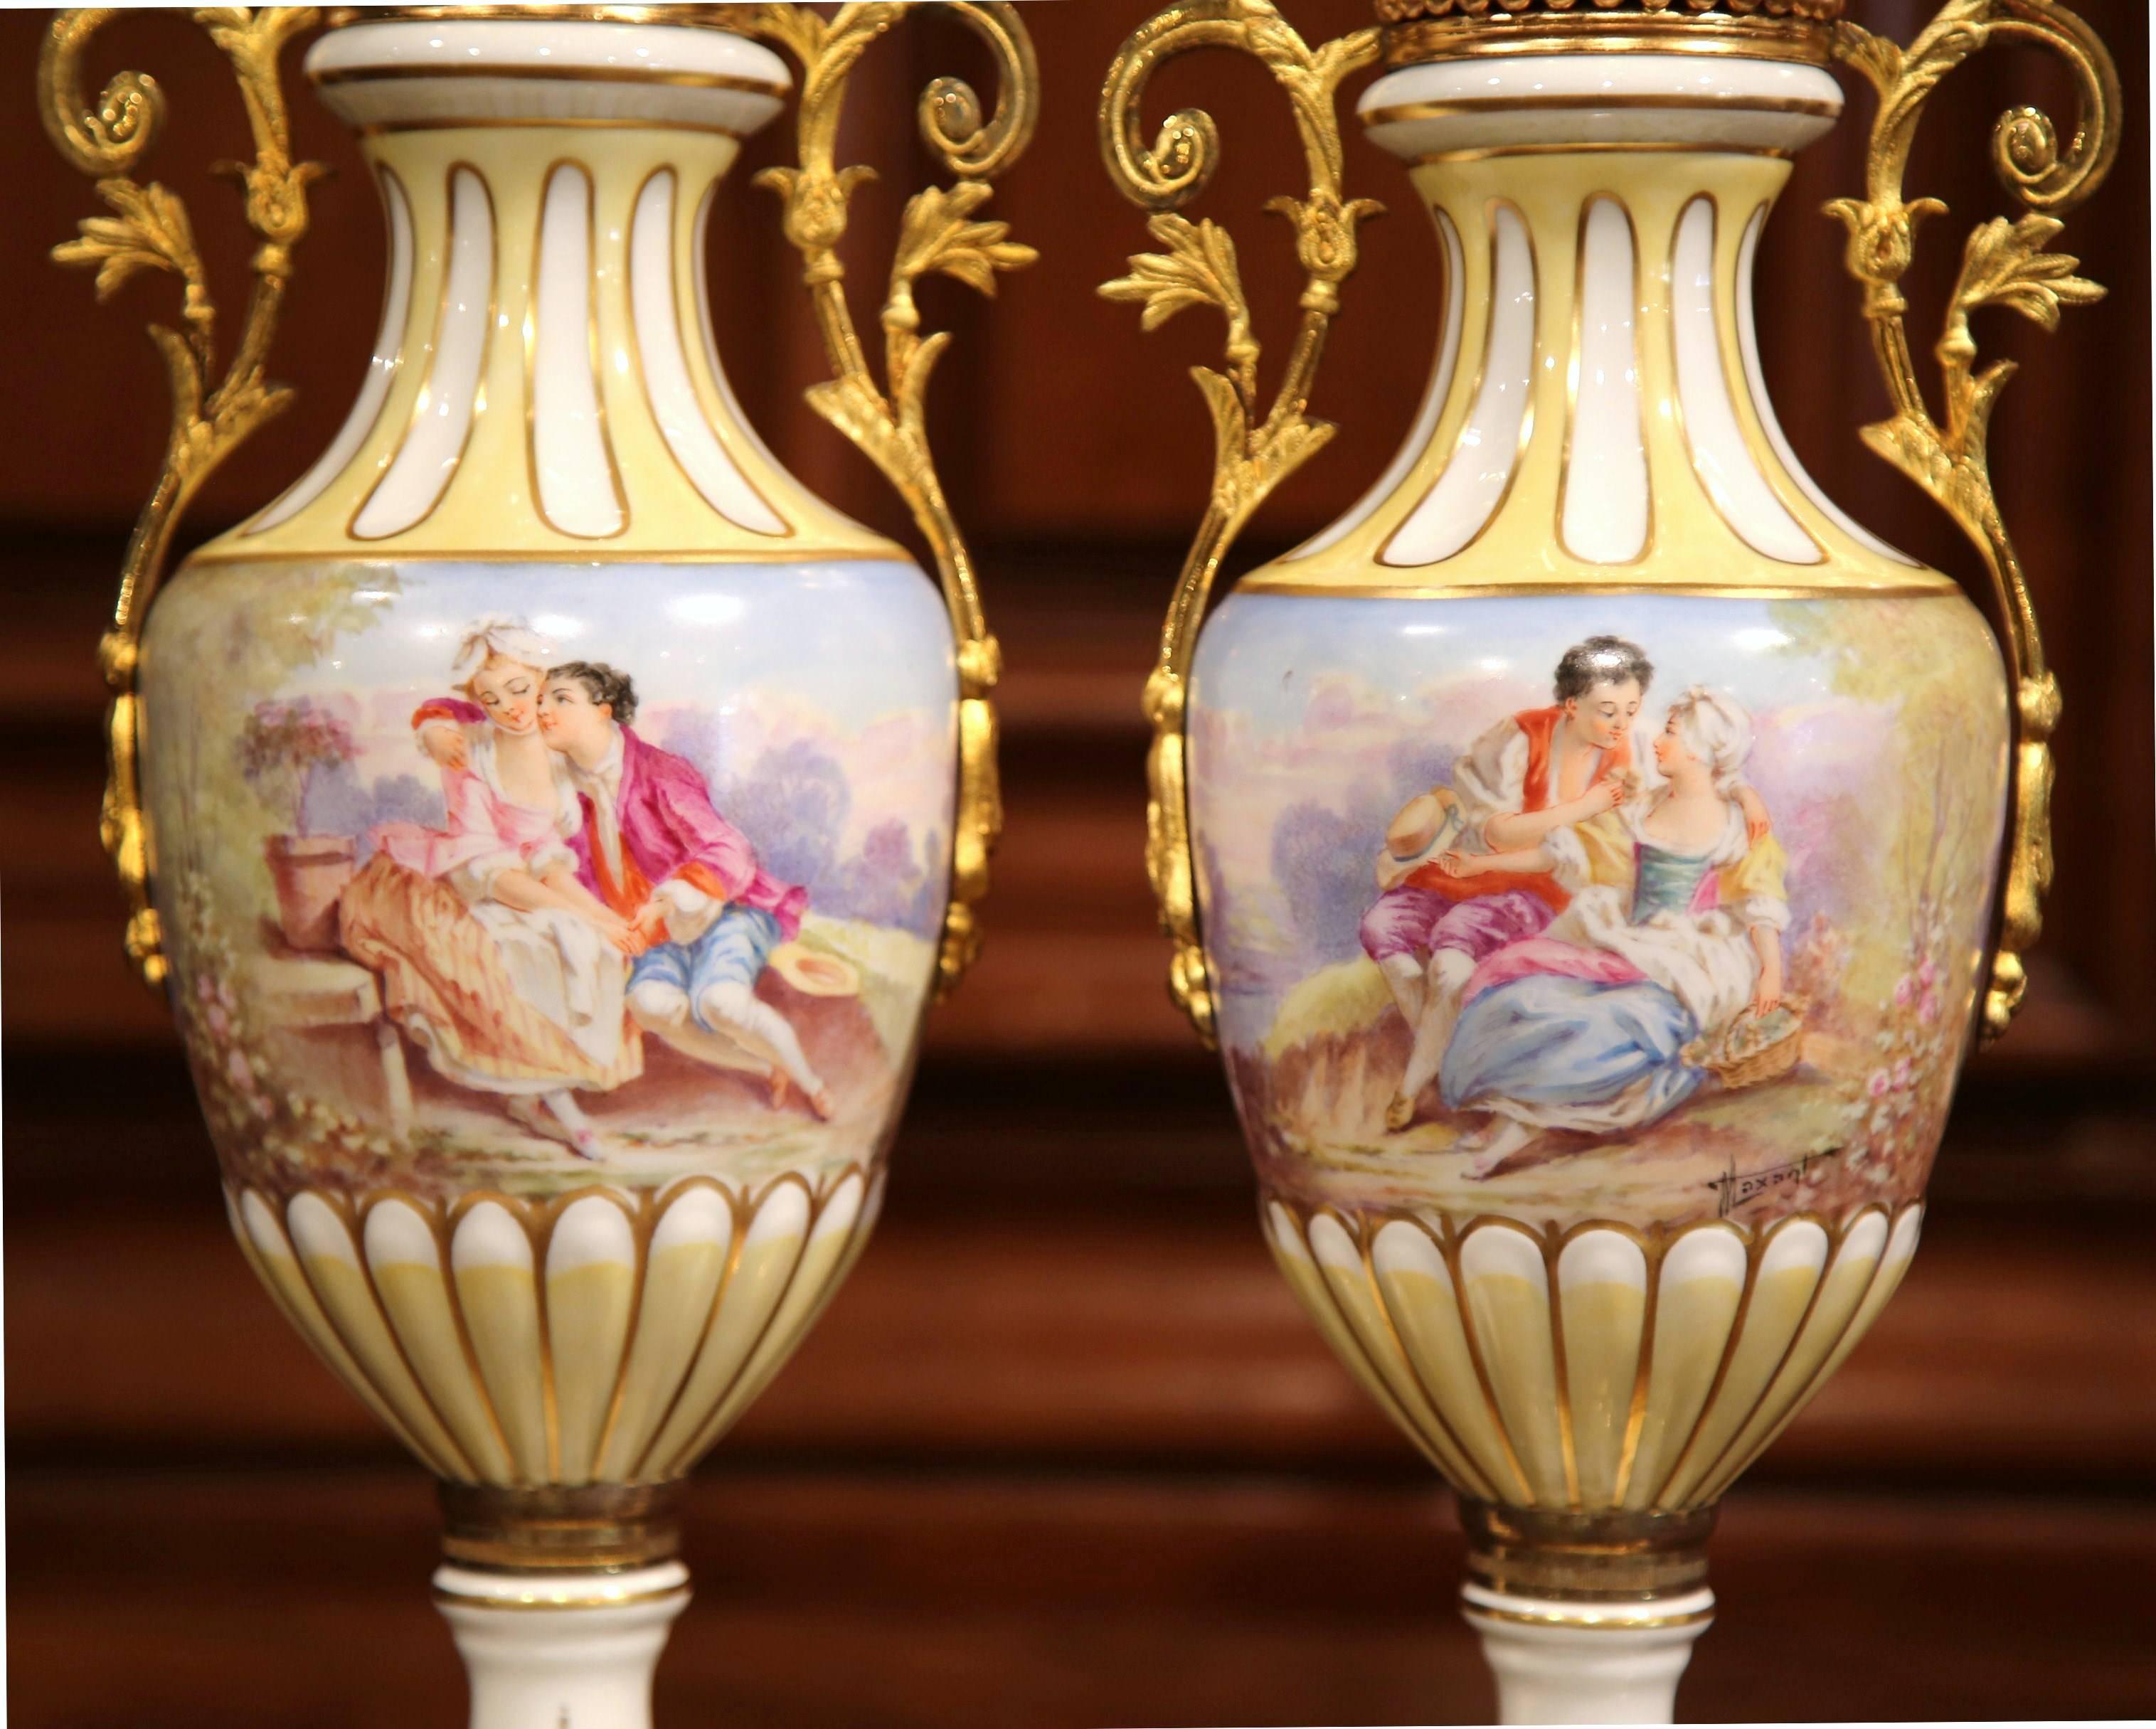 Pair of antique colorful vases from Sevres, France, circa 1890; the pair of hand painted urns with bronze mounts and handles, depicts a courting scene with wonderful colors. The vases are signed Maxant with a stamp "France" at the bottom.